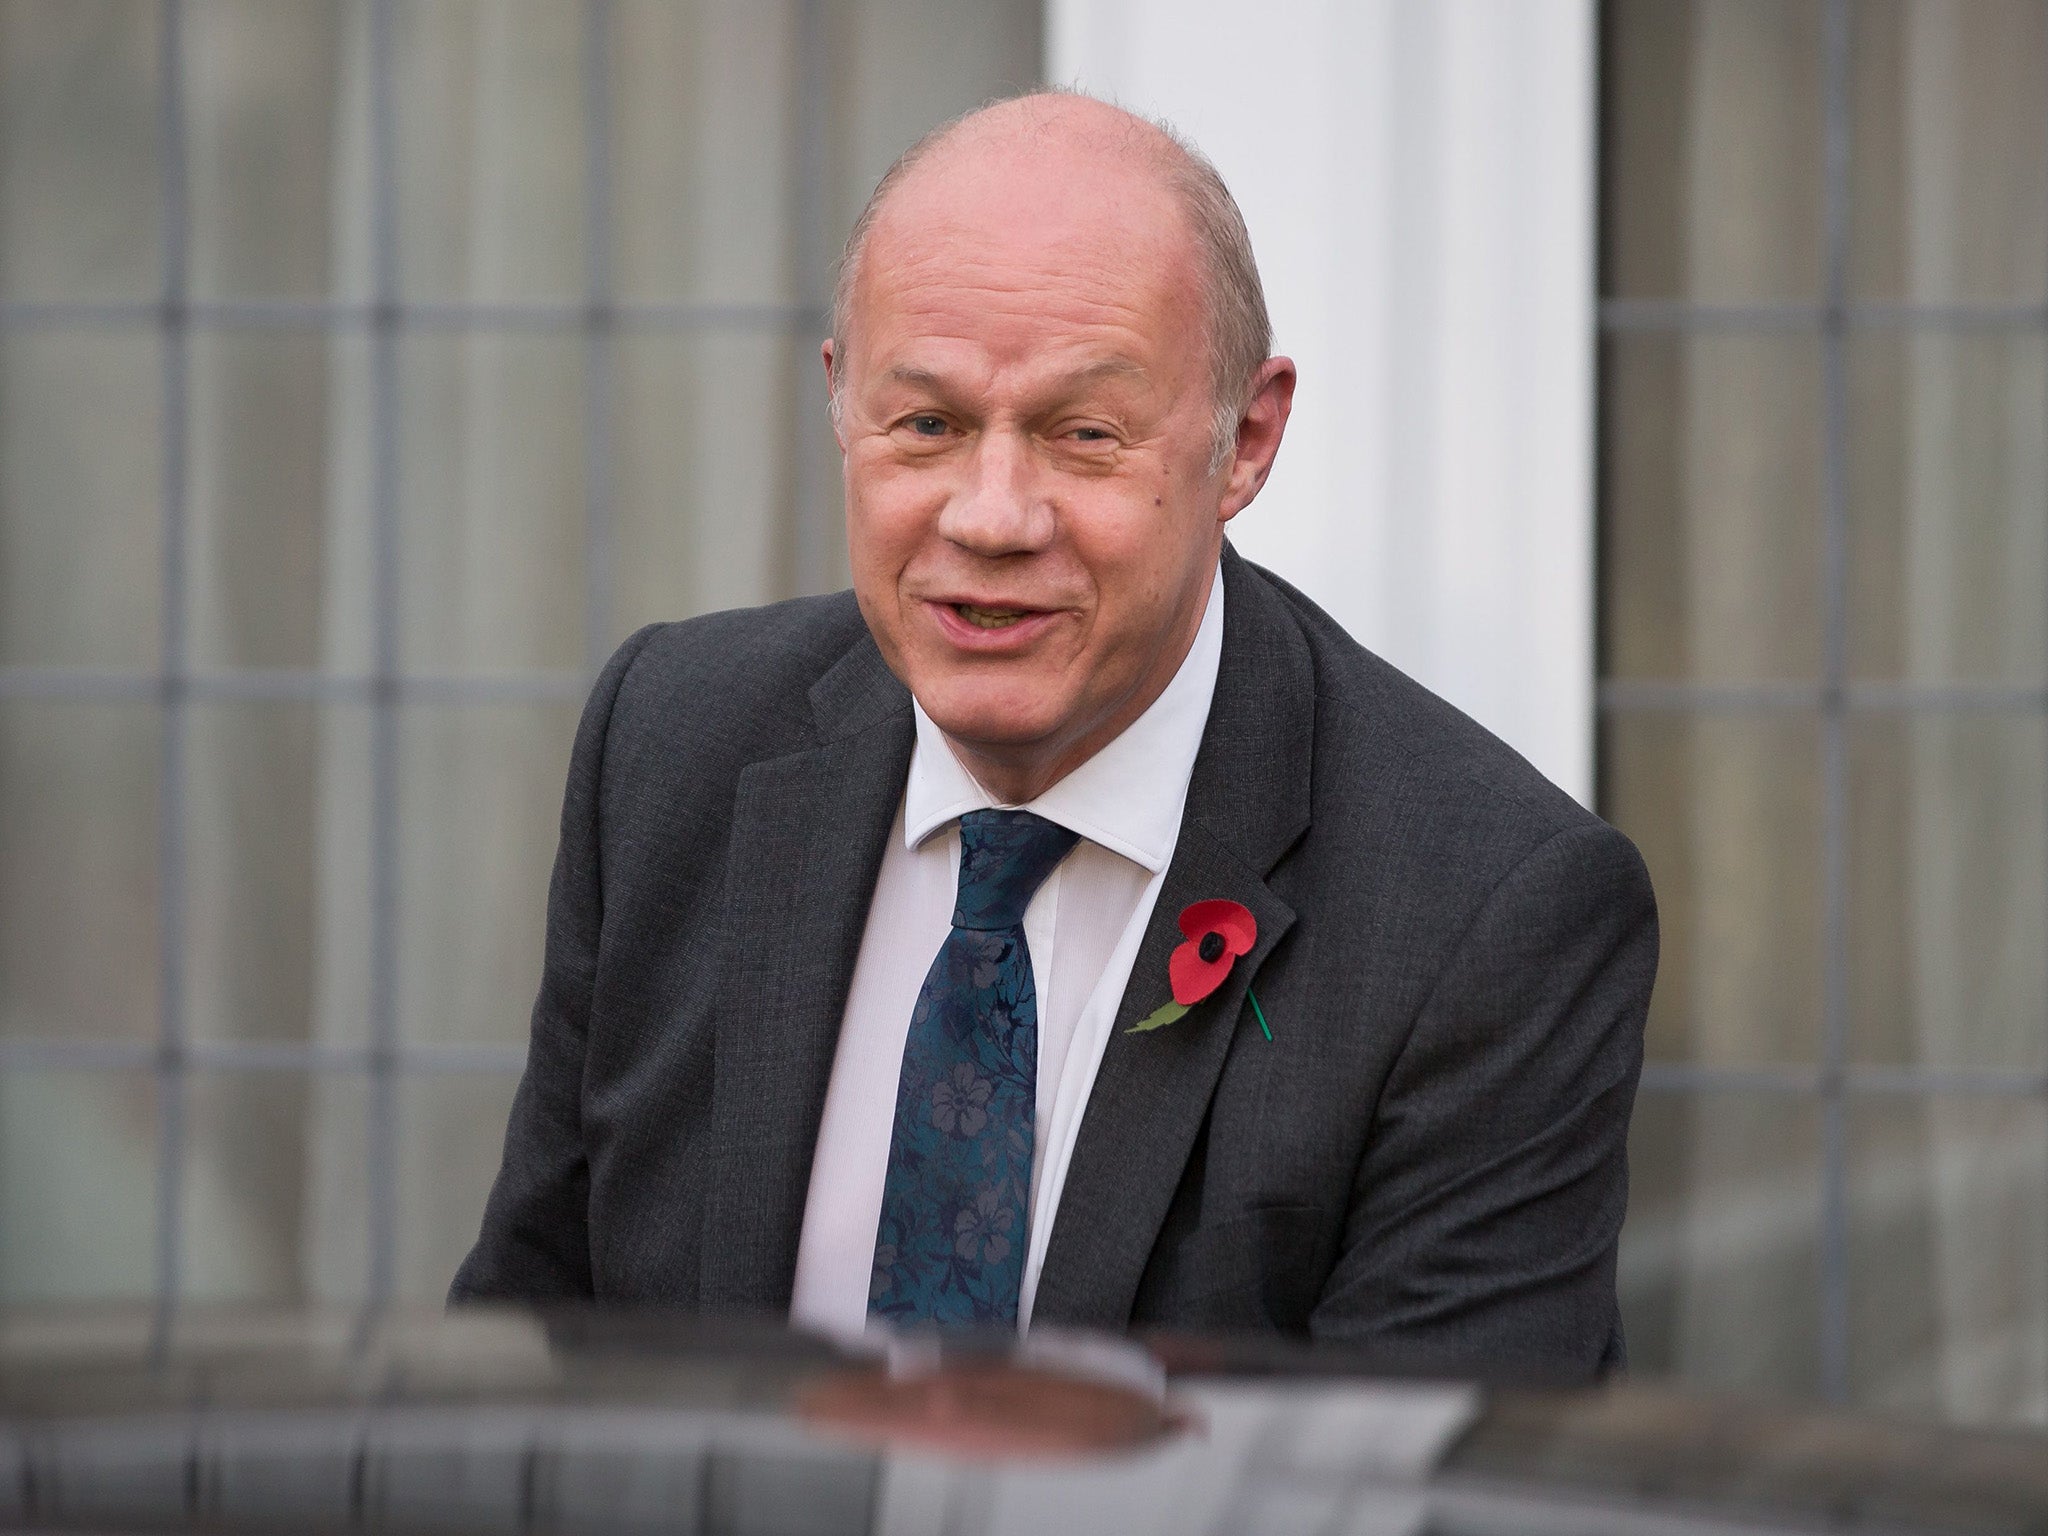 Whether or not Damian Green watched some porn should be the least of our concerns